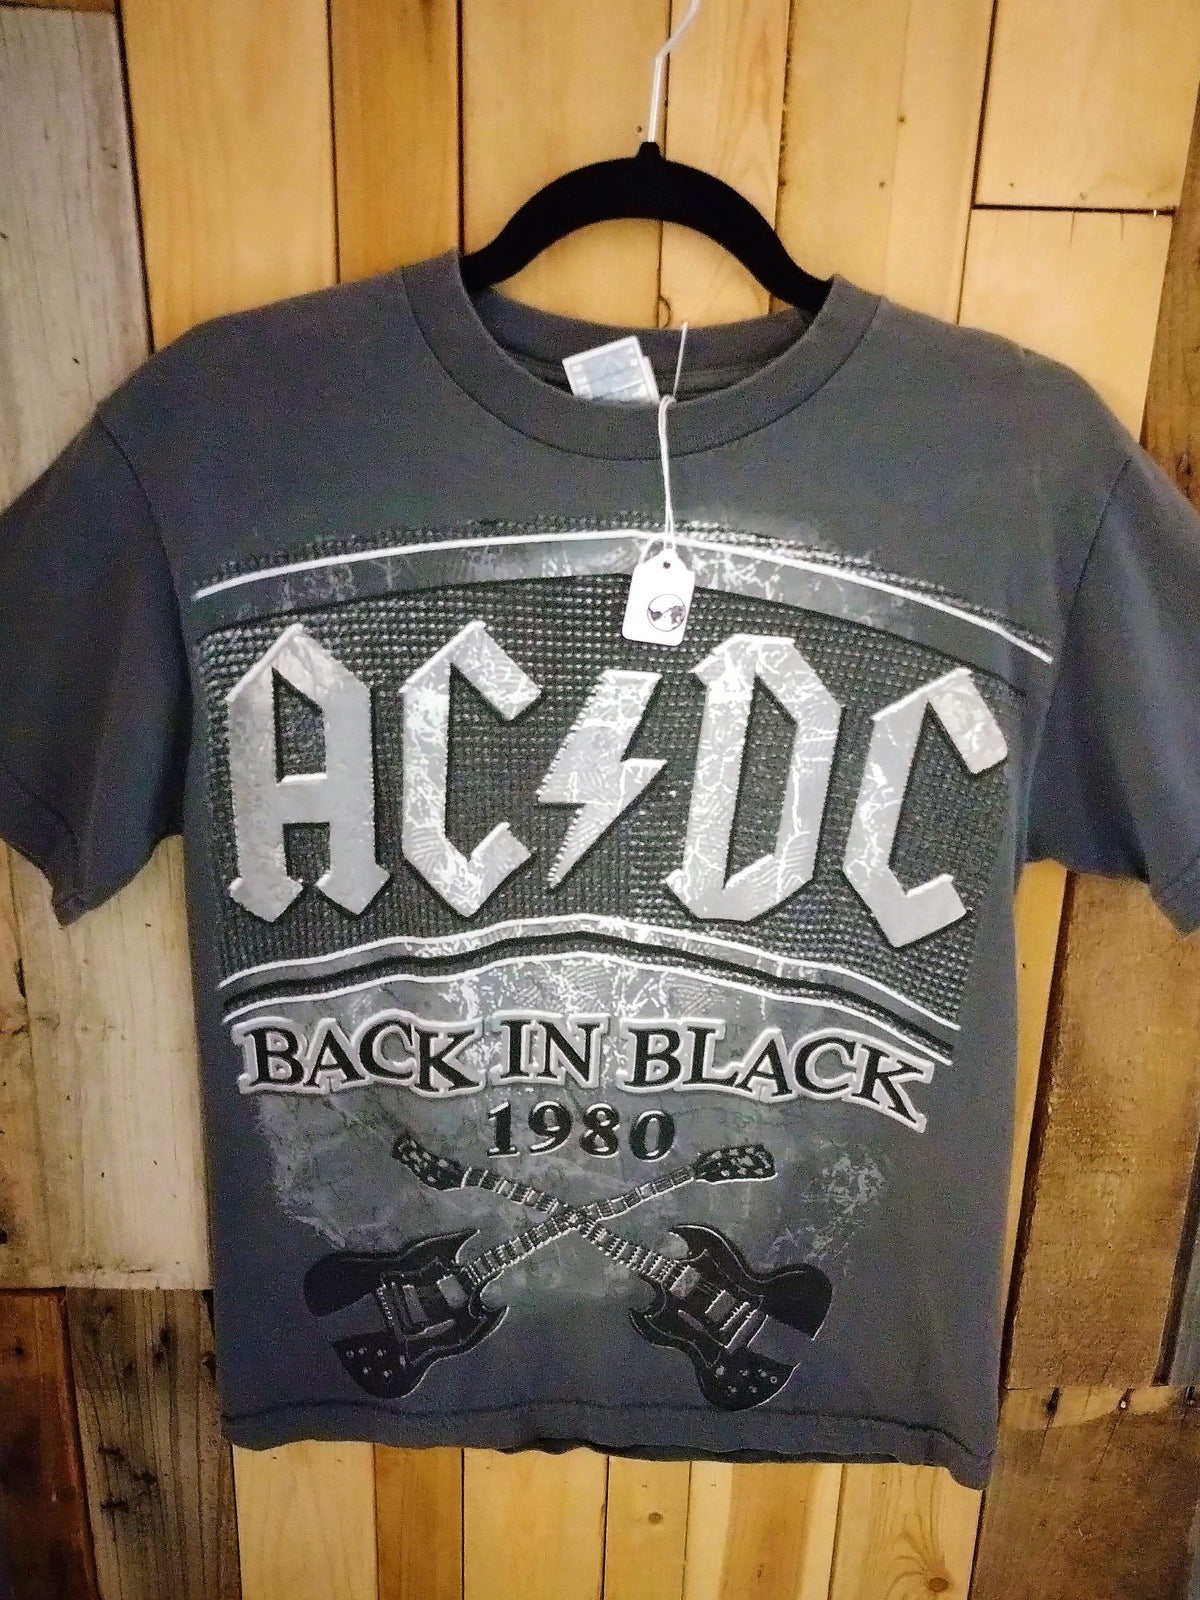 ACDC "Back in Black" T Shirt Size Small